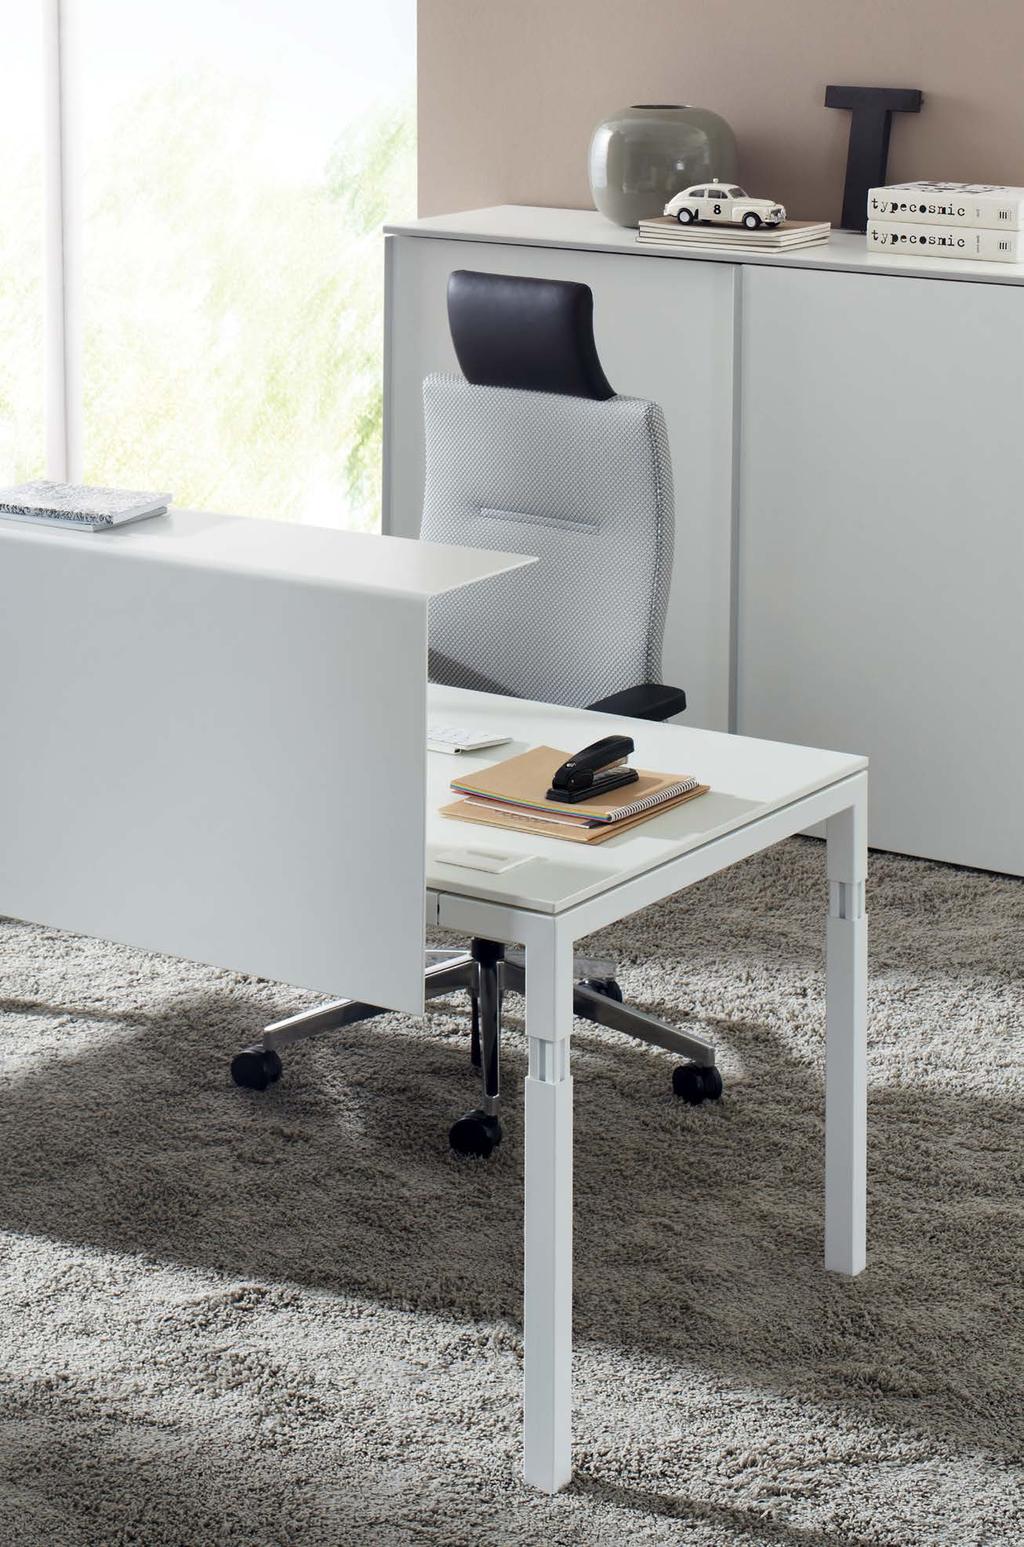 45 1 1: Convenient access to power supply by sliding table top 2: CPU holder 3: Steel cable channel 2 3 The Q3 series is a modern work desk system with contours which closely reflect the design of